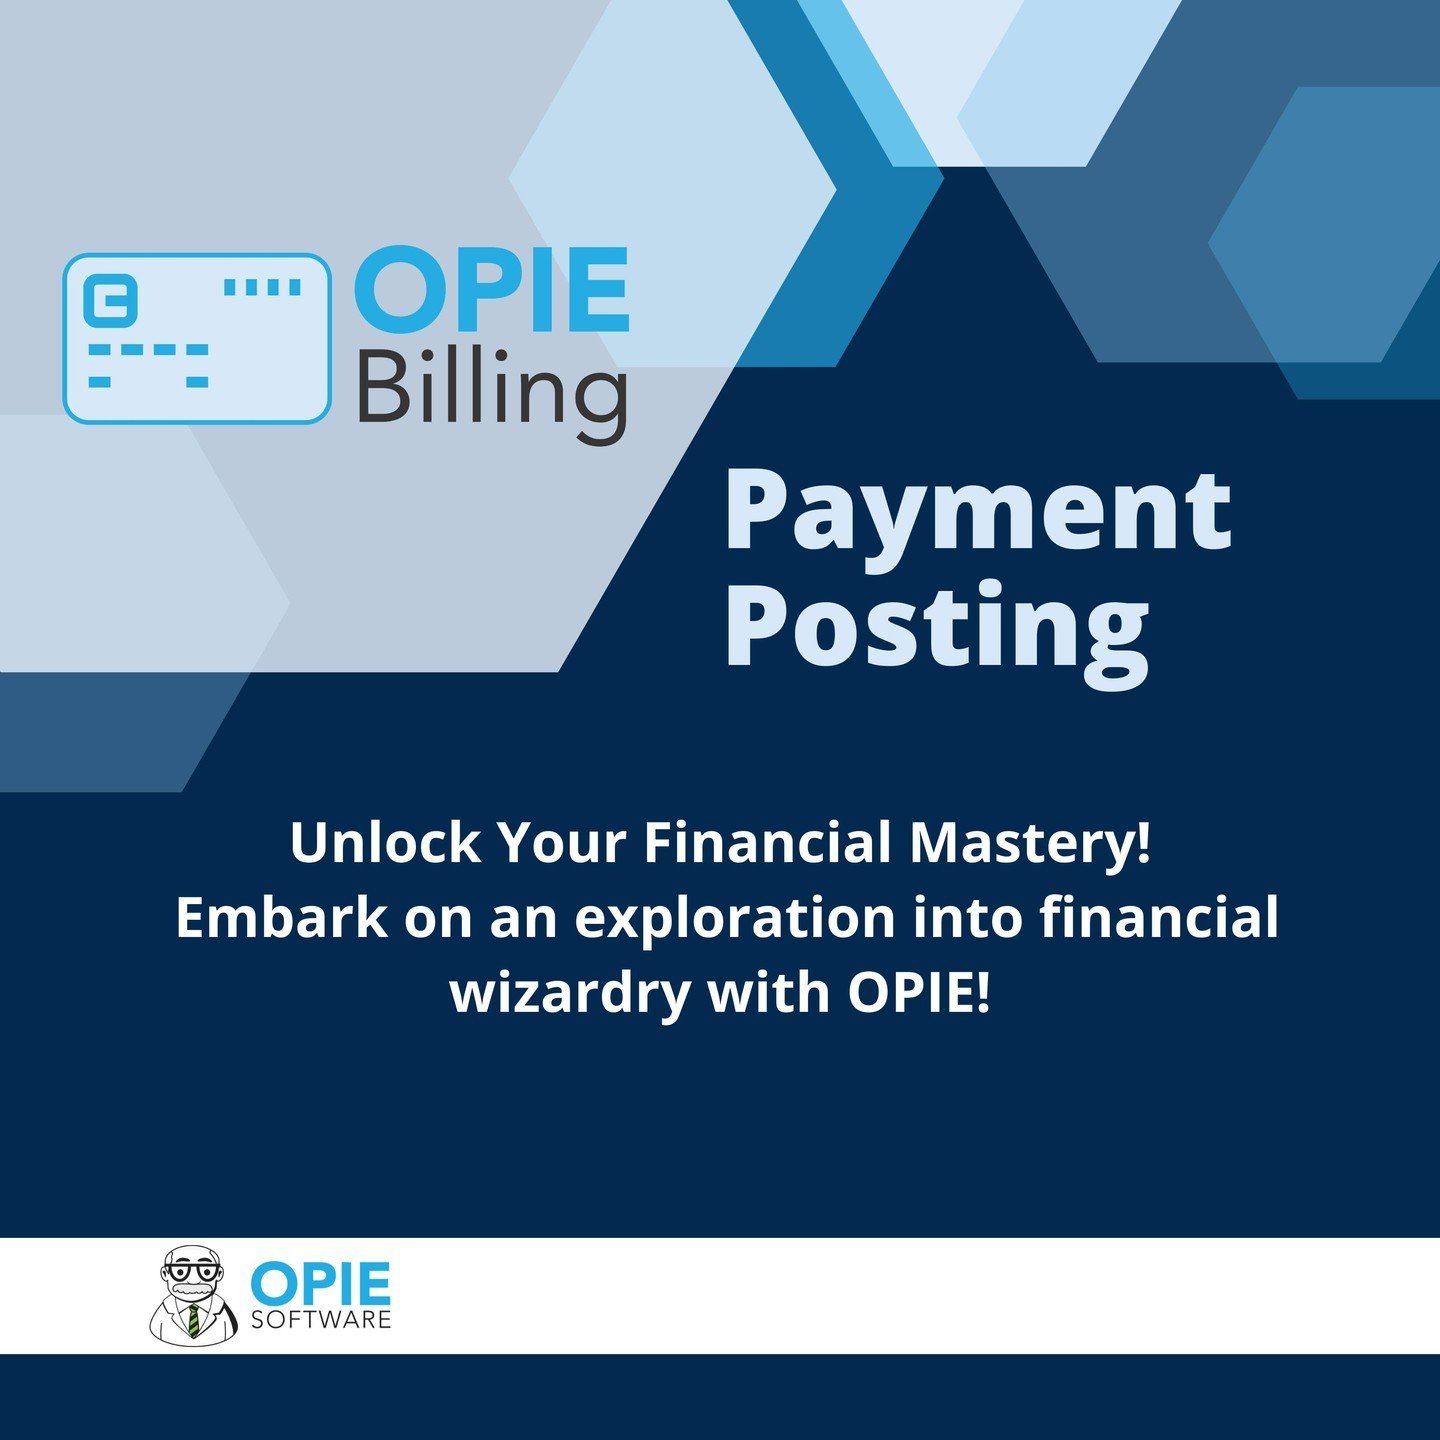 Unlock Your Financial Mastery with OPIE! 💰
Embark on an exploration into financial wizardry with OPIE! 💼
Join us tomorrow, May 22, as we delve into the intricacies of:
💡 Manual Posting: Full control of your finances.
🚀 Auto Posting: Free up your 